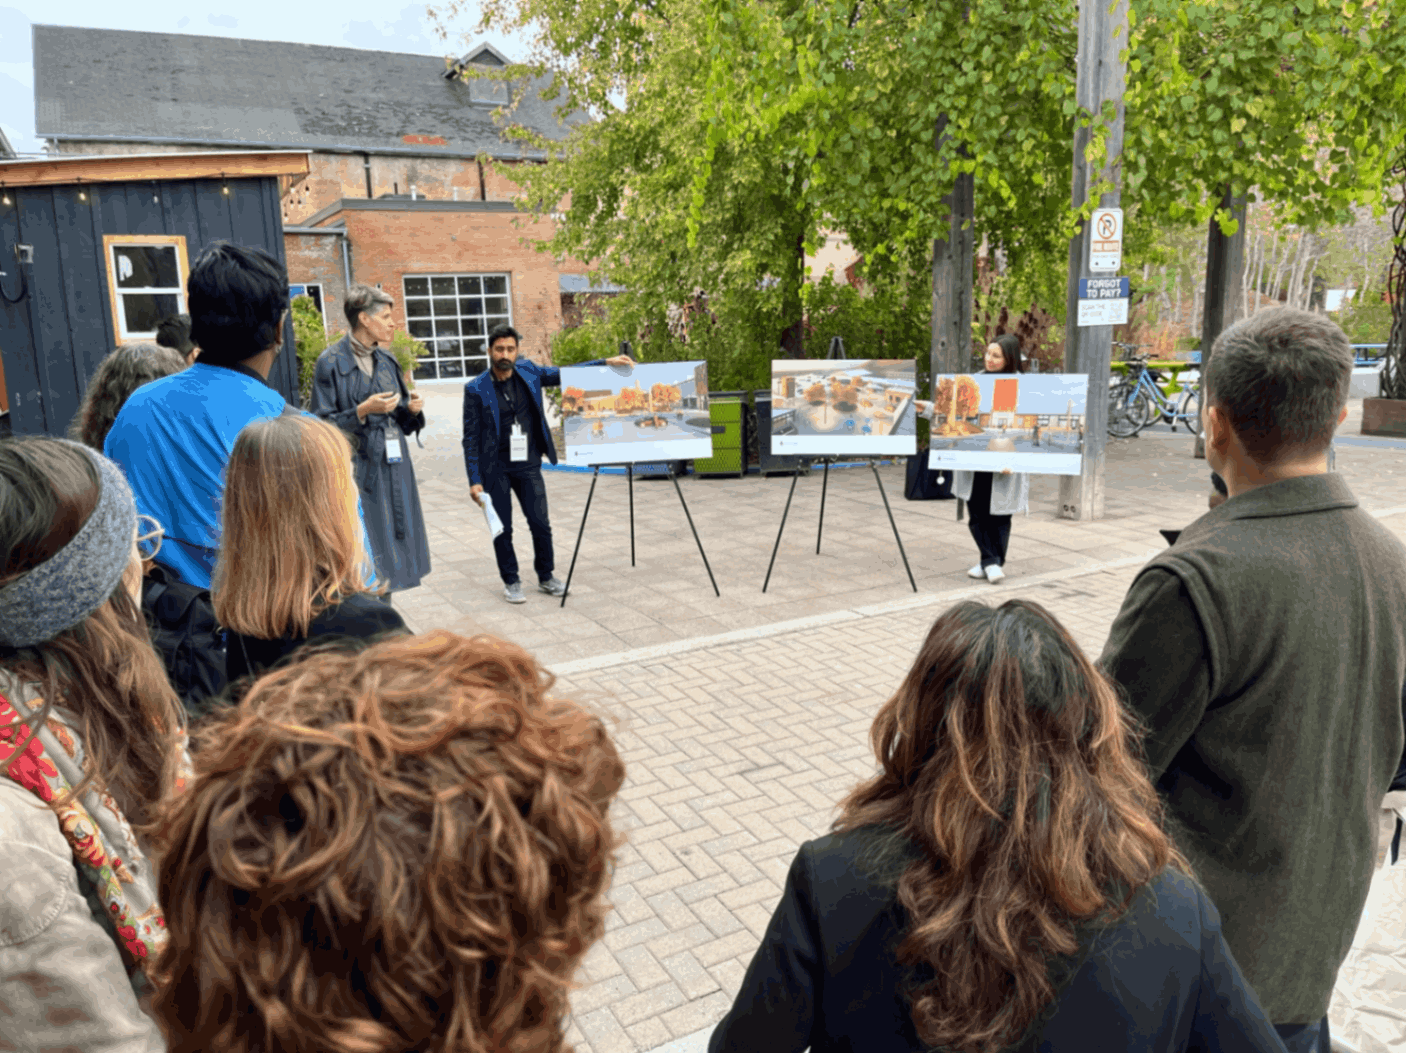 A crowd gathers around renderings showing future plans for Evergreen Brick Works